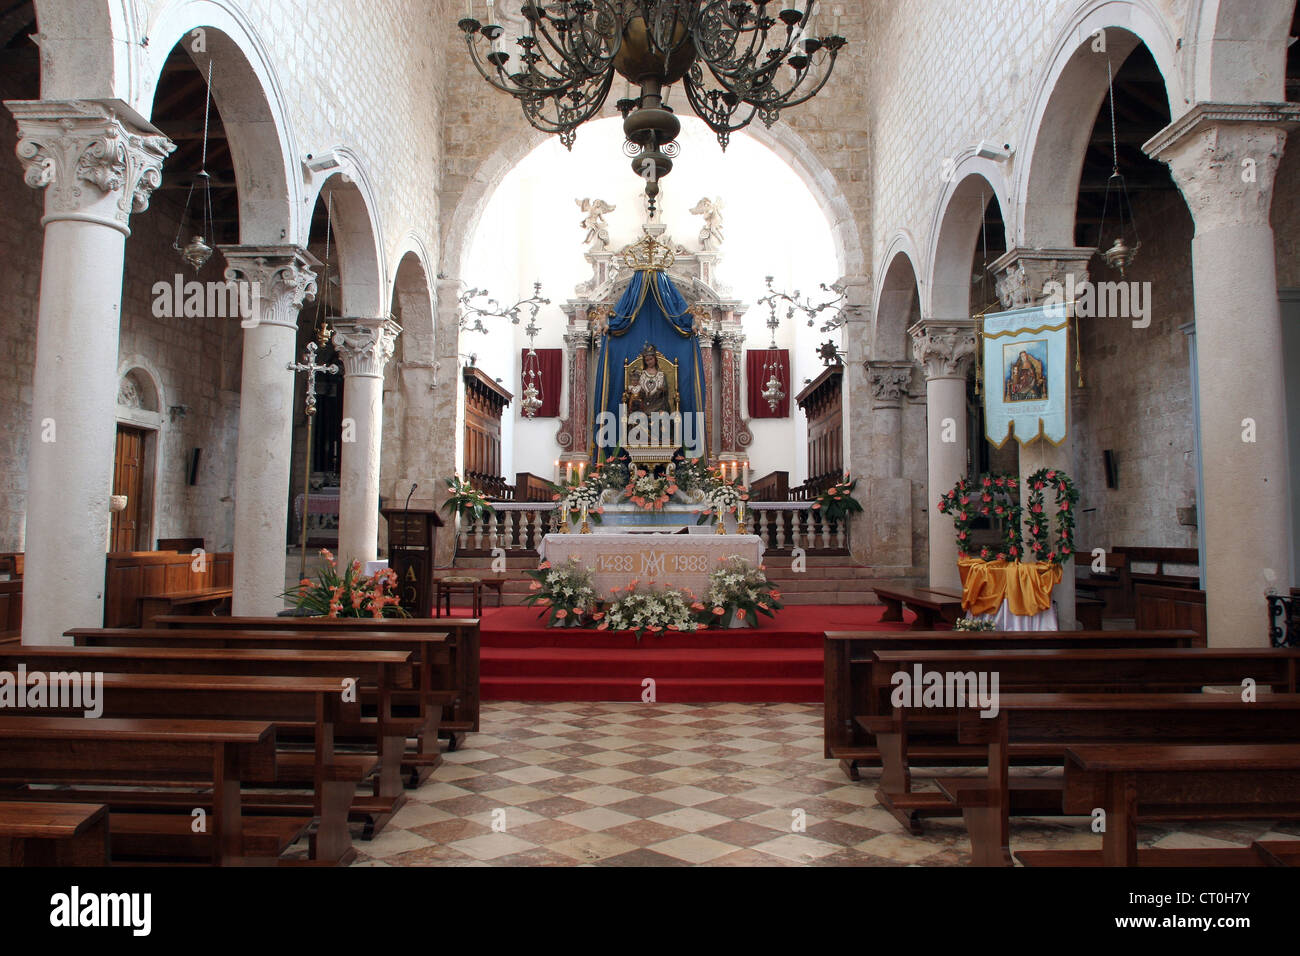 Altar in the Church of Assumption of the Blessed Virgin Mary in Pag Stock Photo